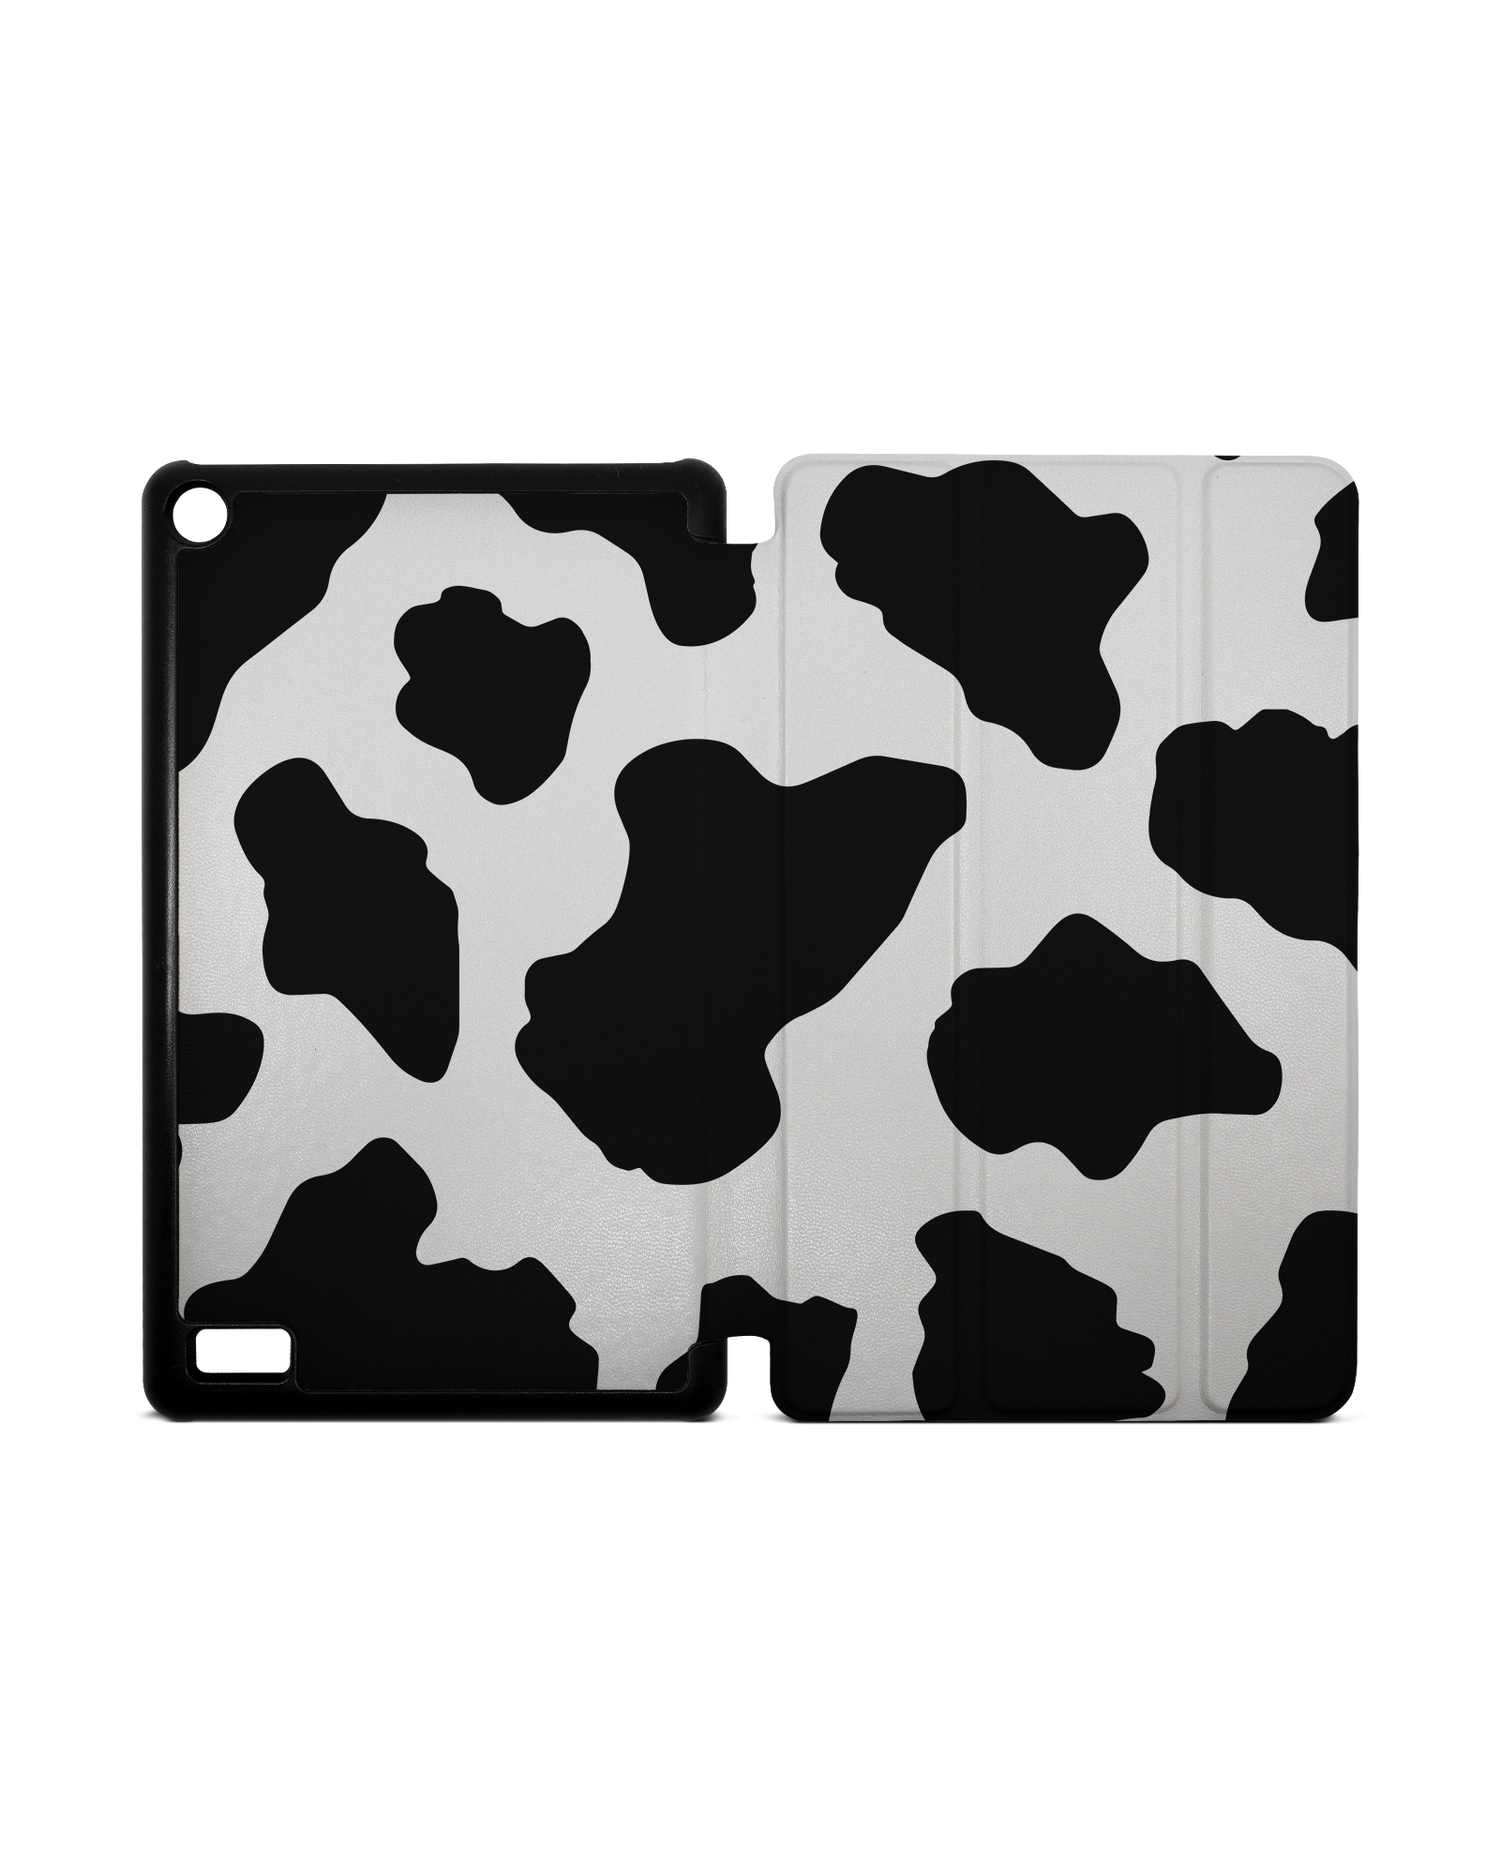 Cow Print 2 Tablet Smart Case for Amazon Fire 7: Opened